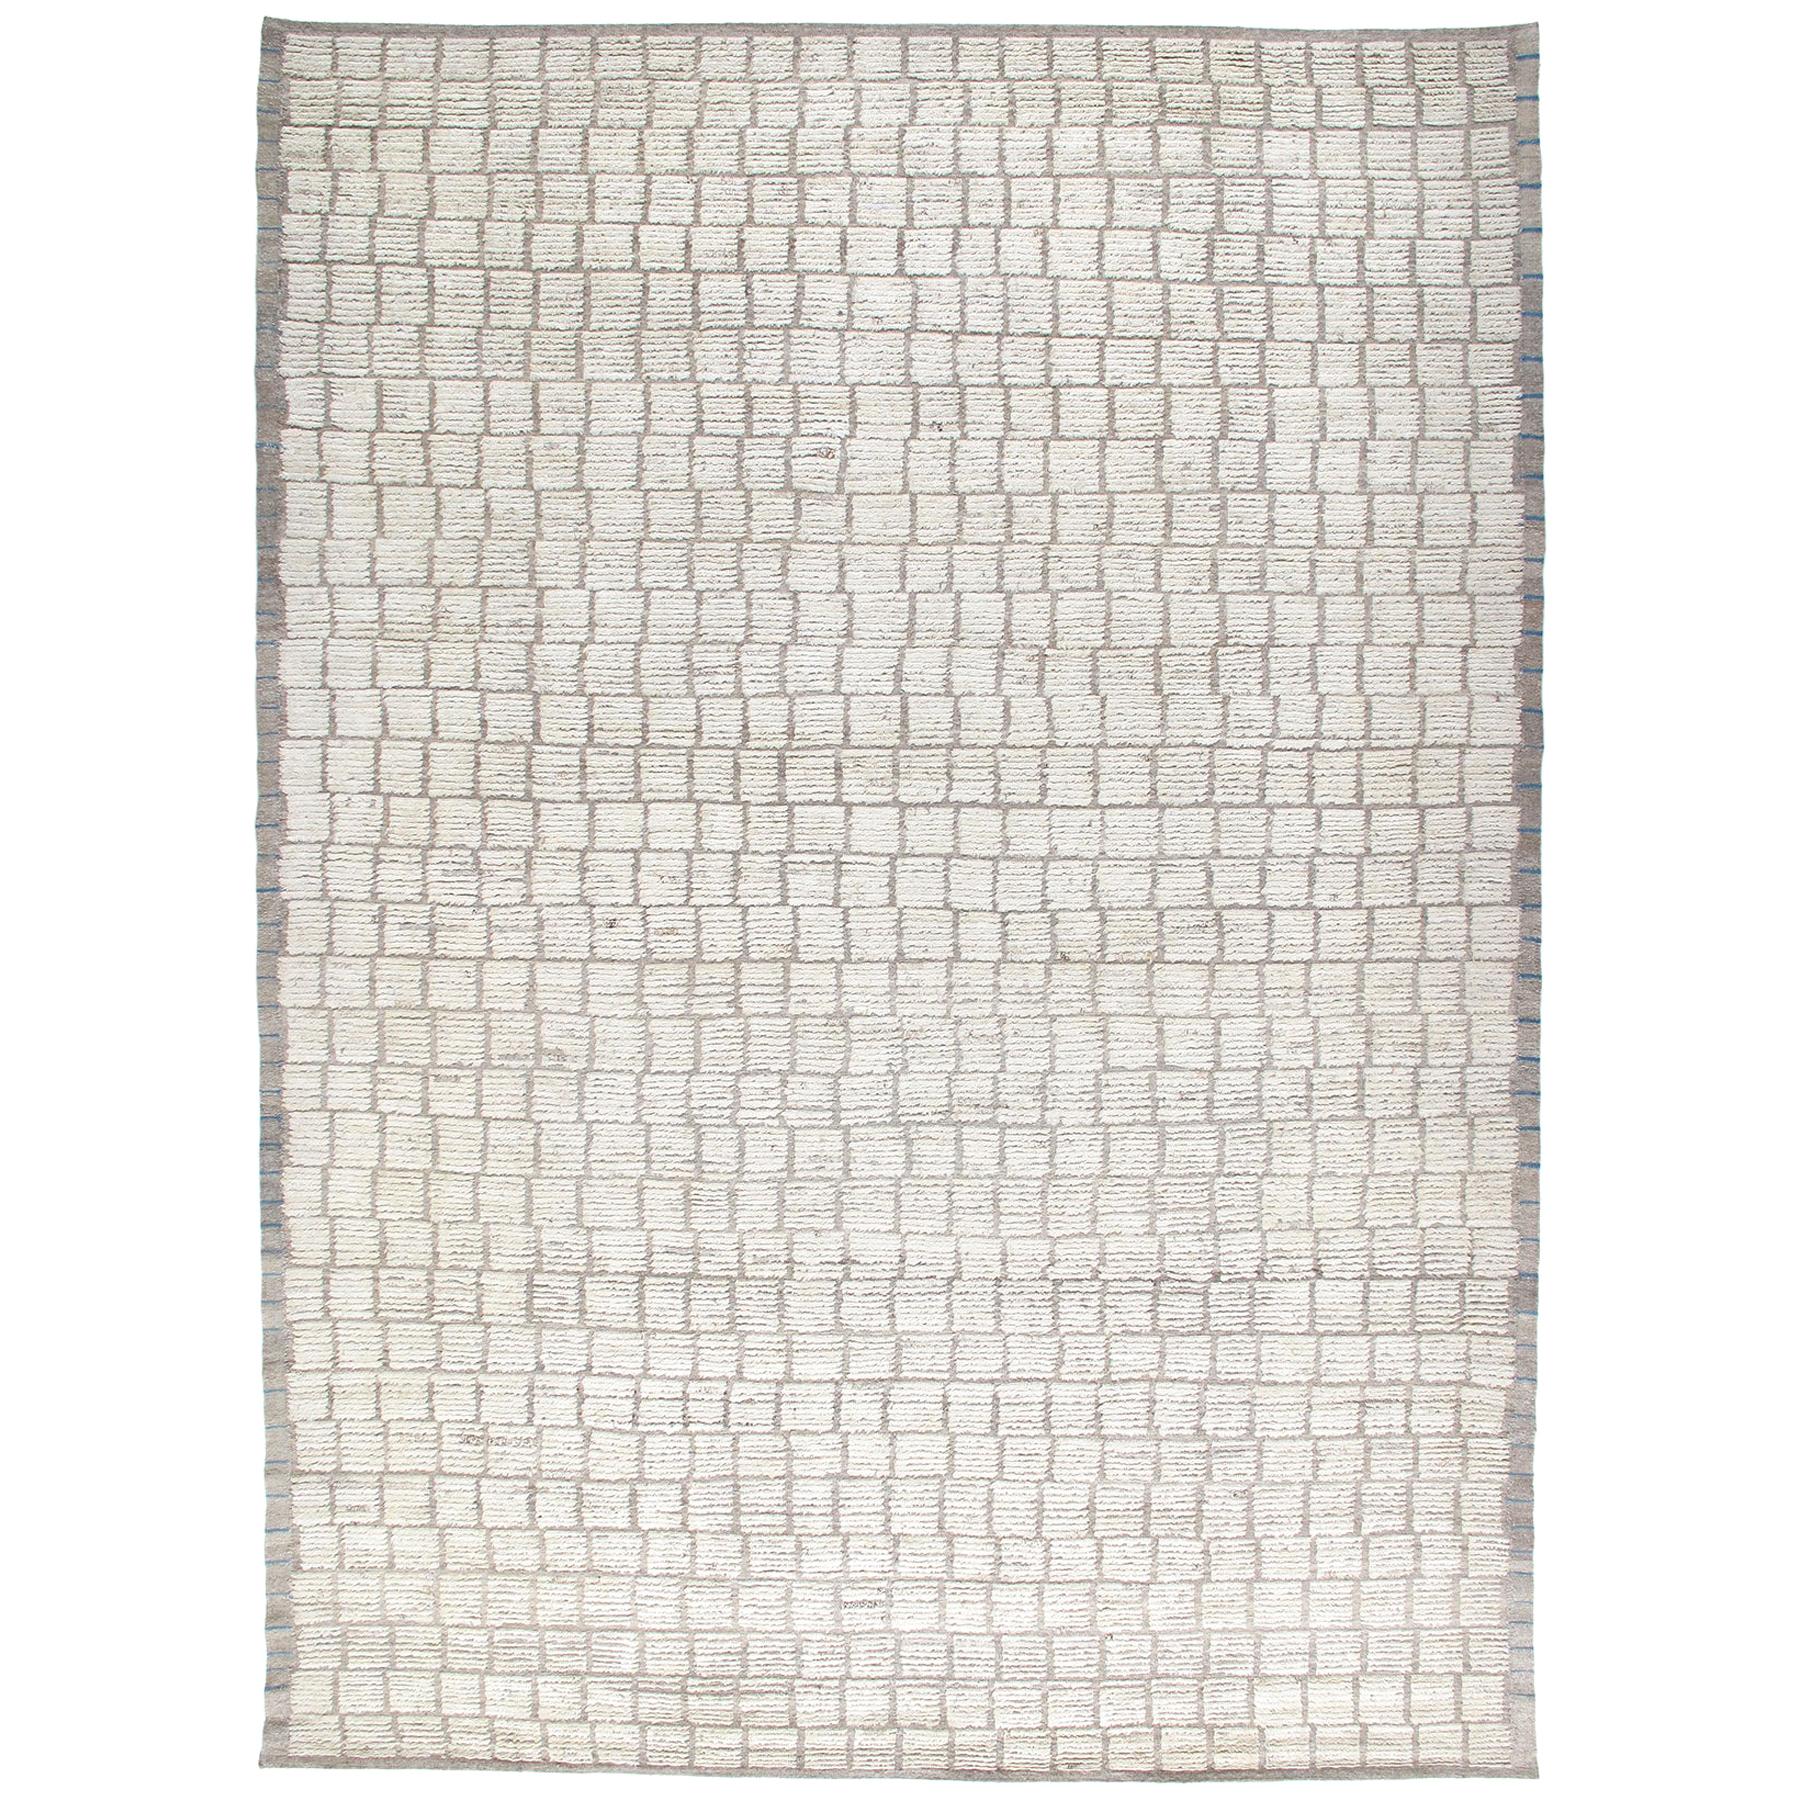 Contemporary Moroccan Inspired Rug with a Textural Design